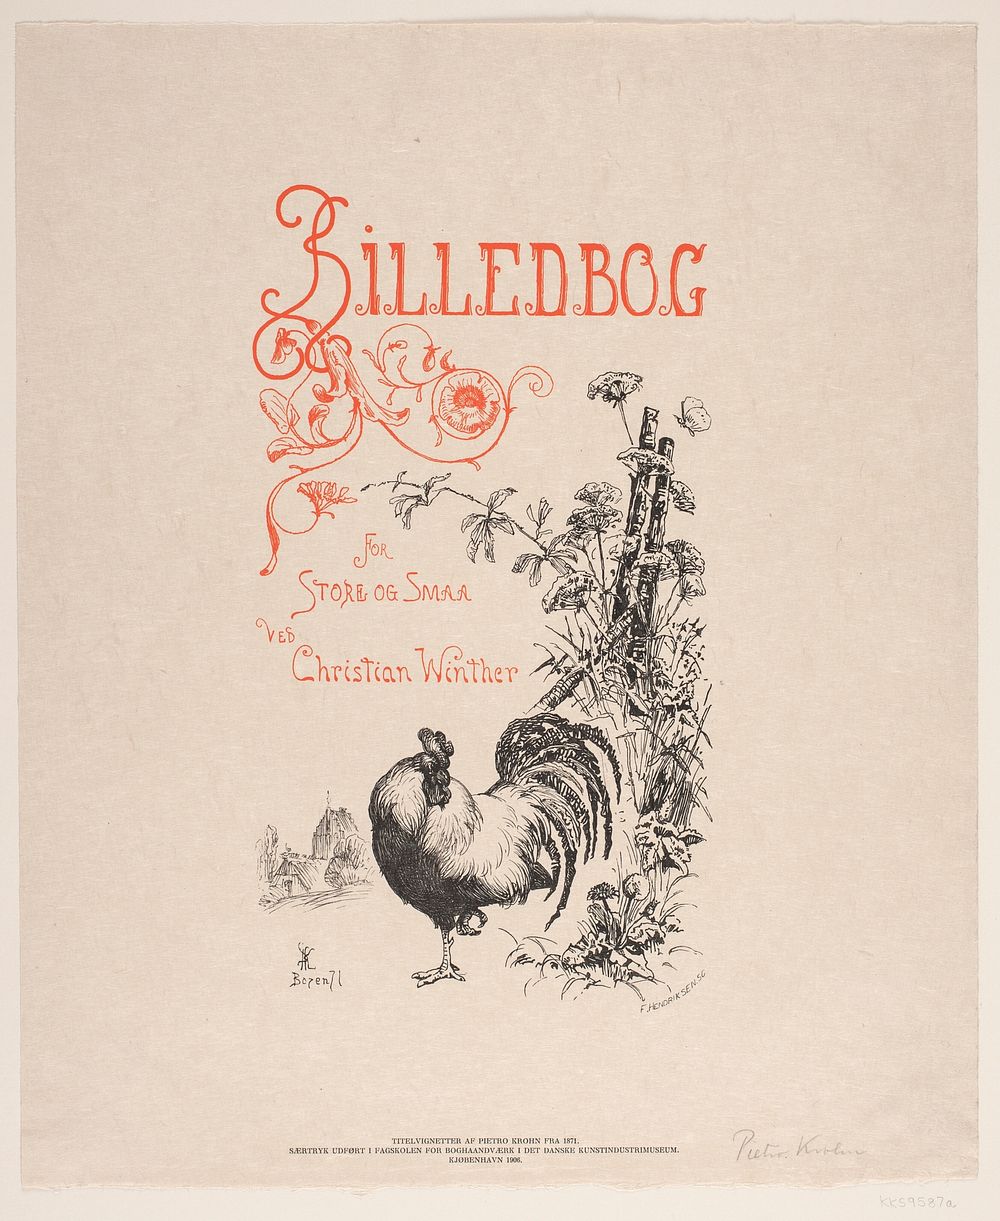 The cover front for Chr.Winther's "Picture Book for Big and Small" by Frederik Hendriksen